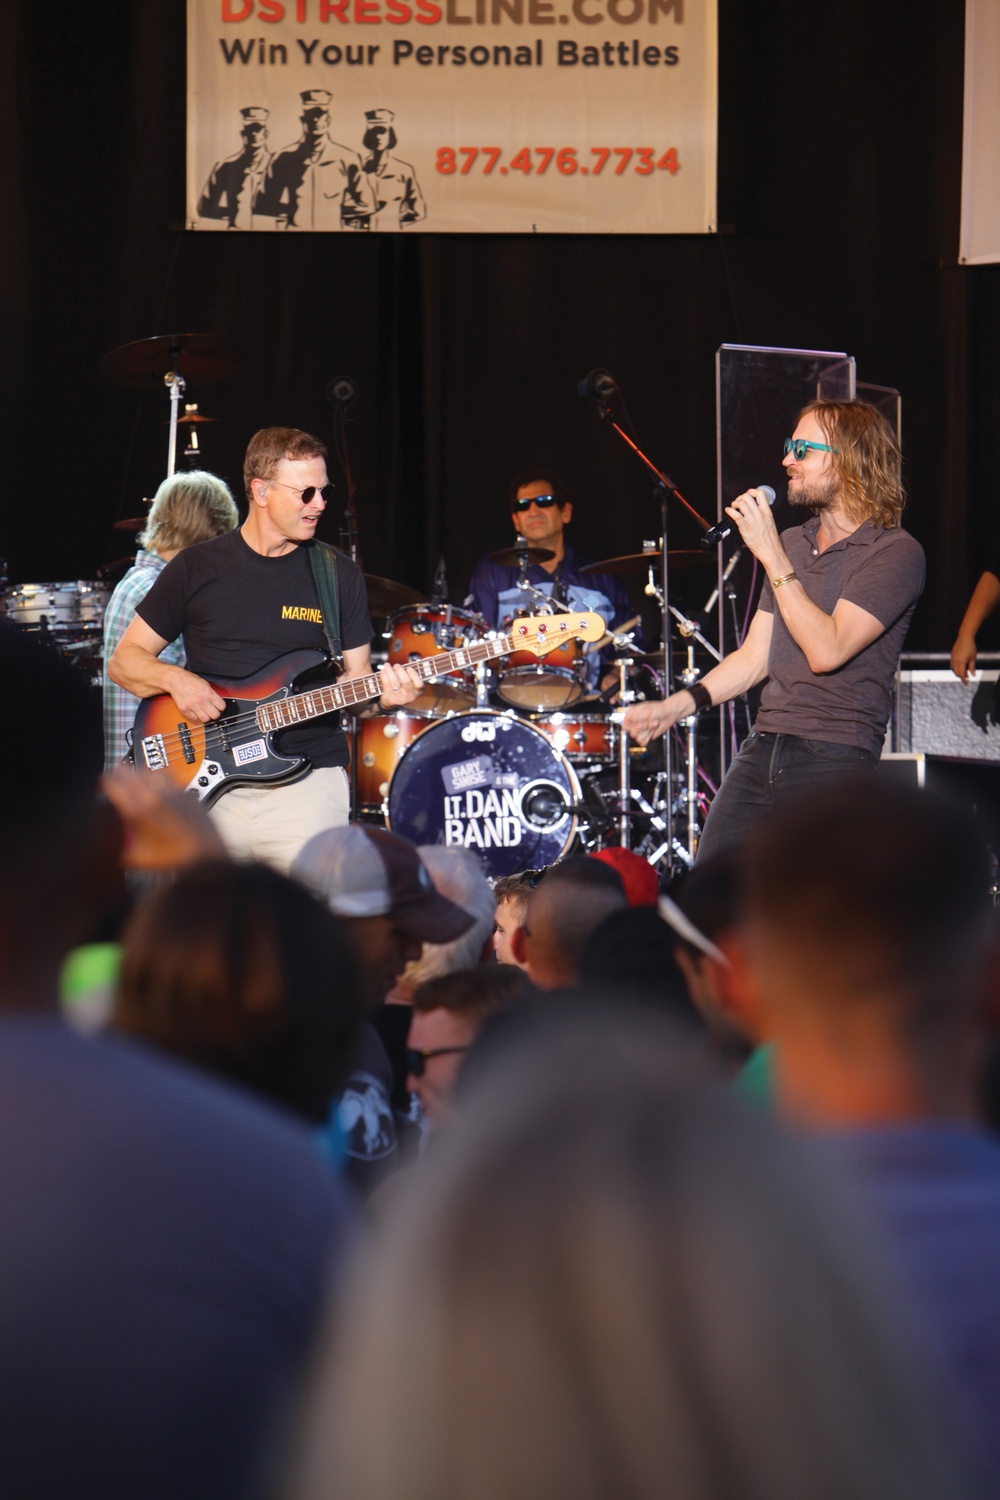 Gary Sinise, Lt Dan Band add flair to Fourth of July